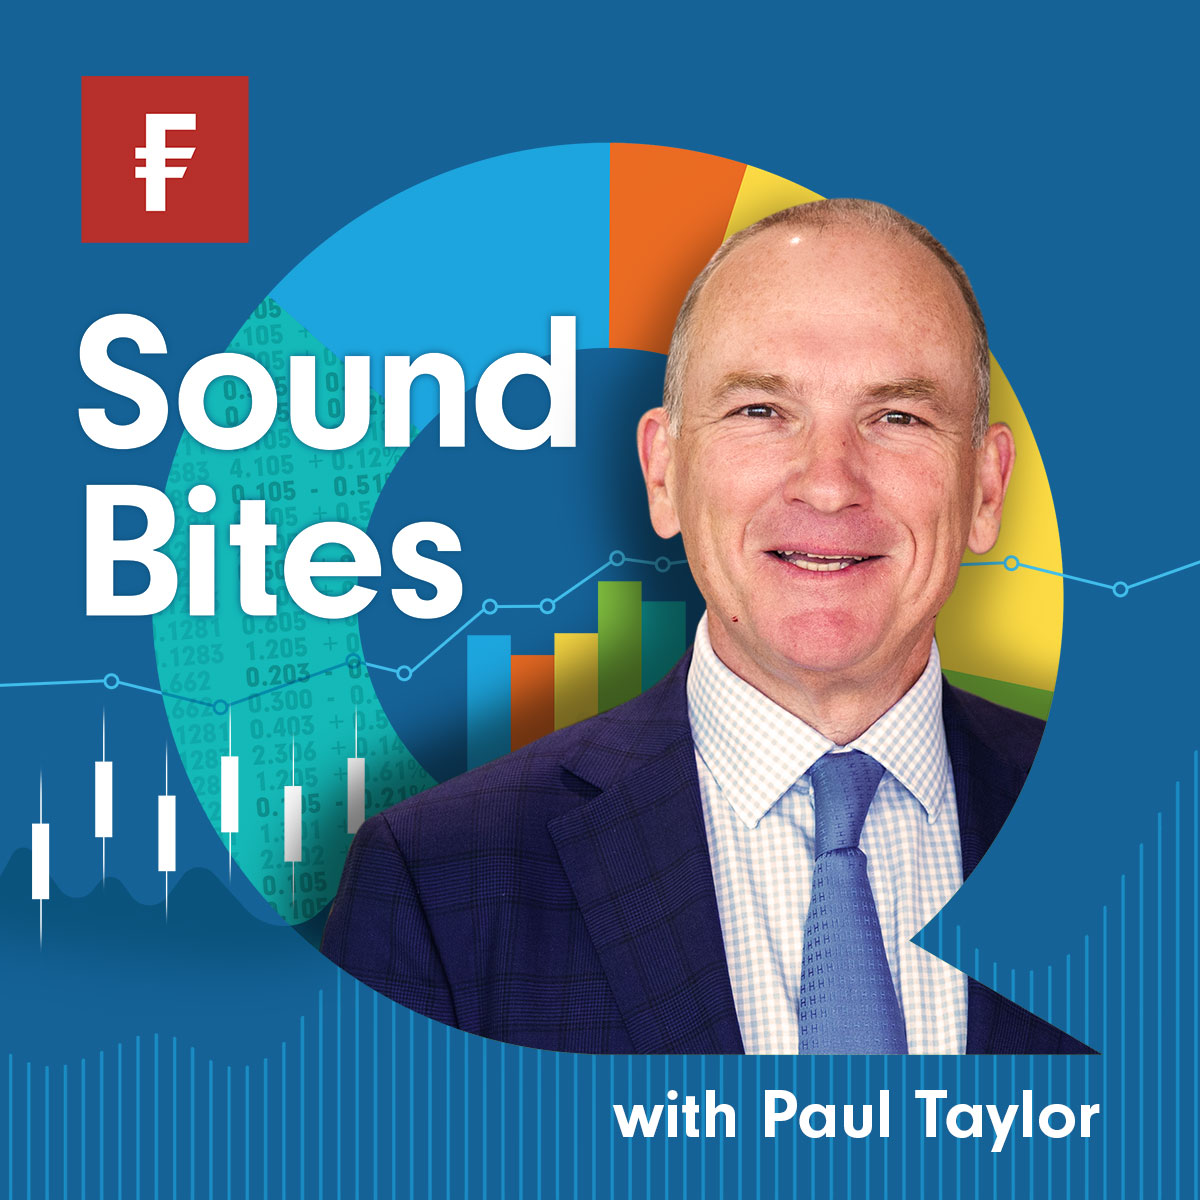 Paul Taylor | What does SVB mean for Aussie financials?